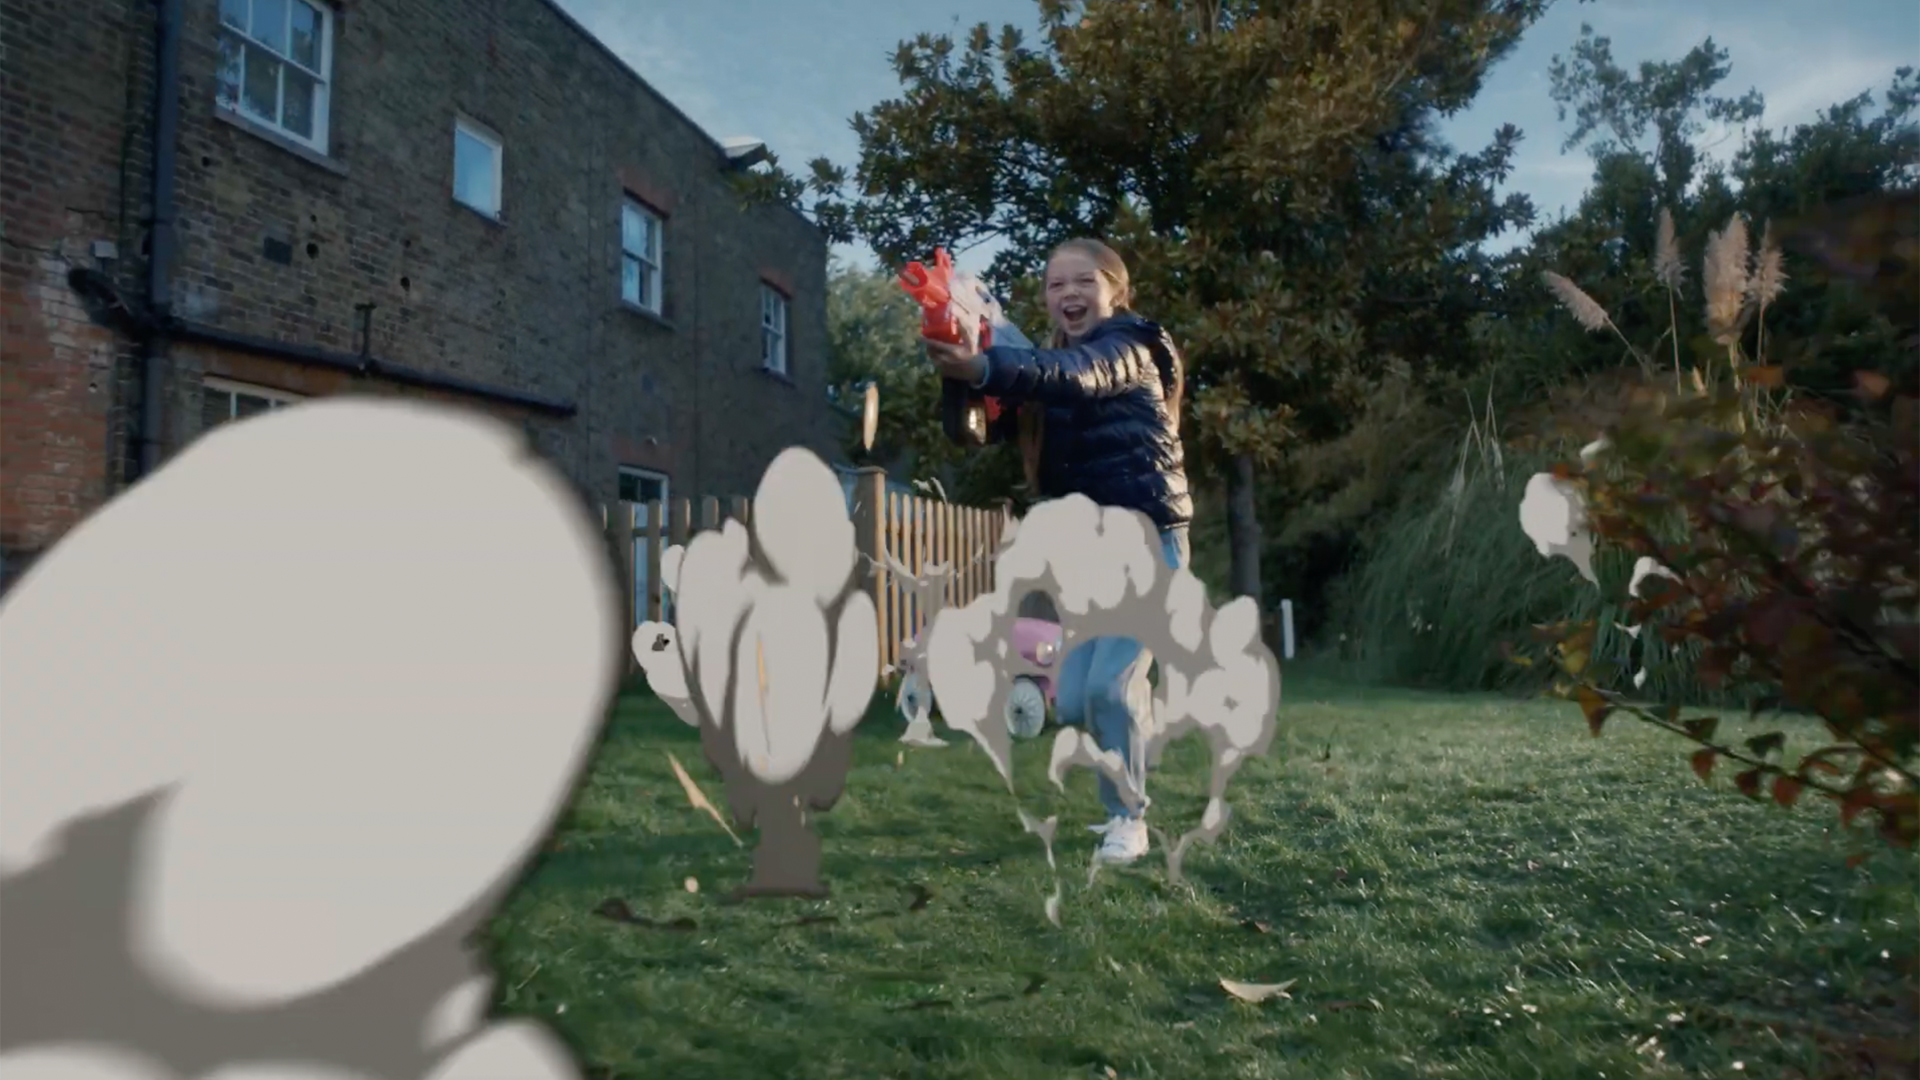 Exterior shot of a back garden with a girl around 10 years old playing with a super soaker.